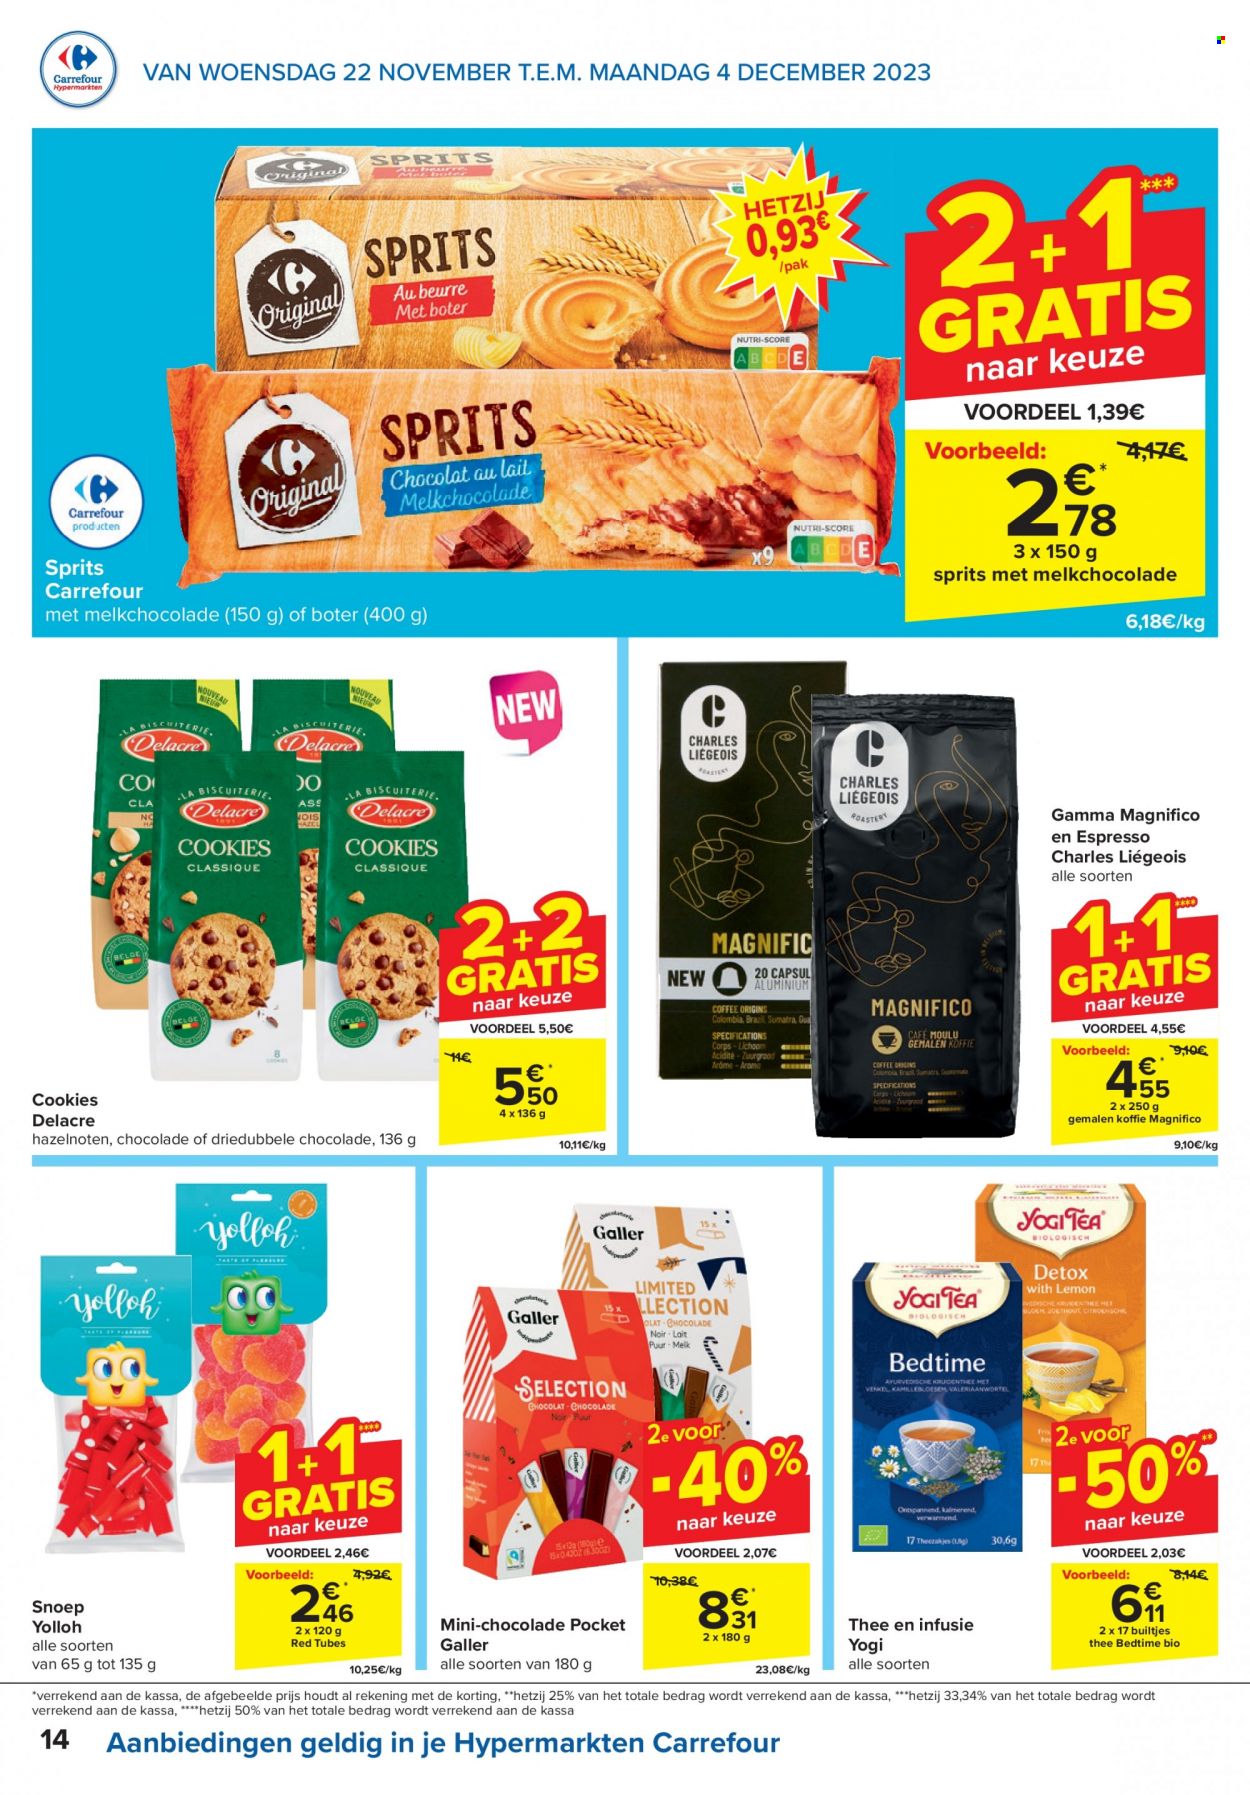 Catalogue Carrefour hypermarkt - 22.11.2023 - 4.12.2023. Page 14.